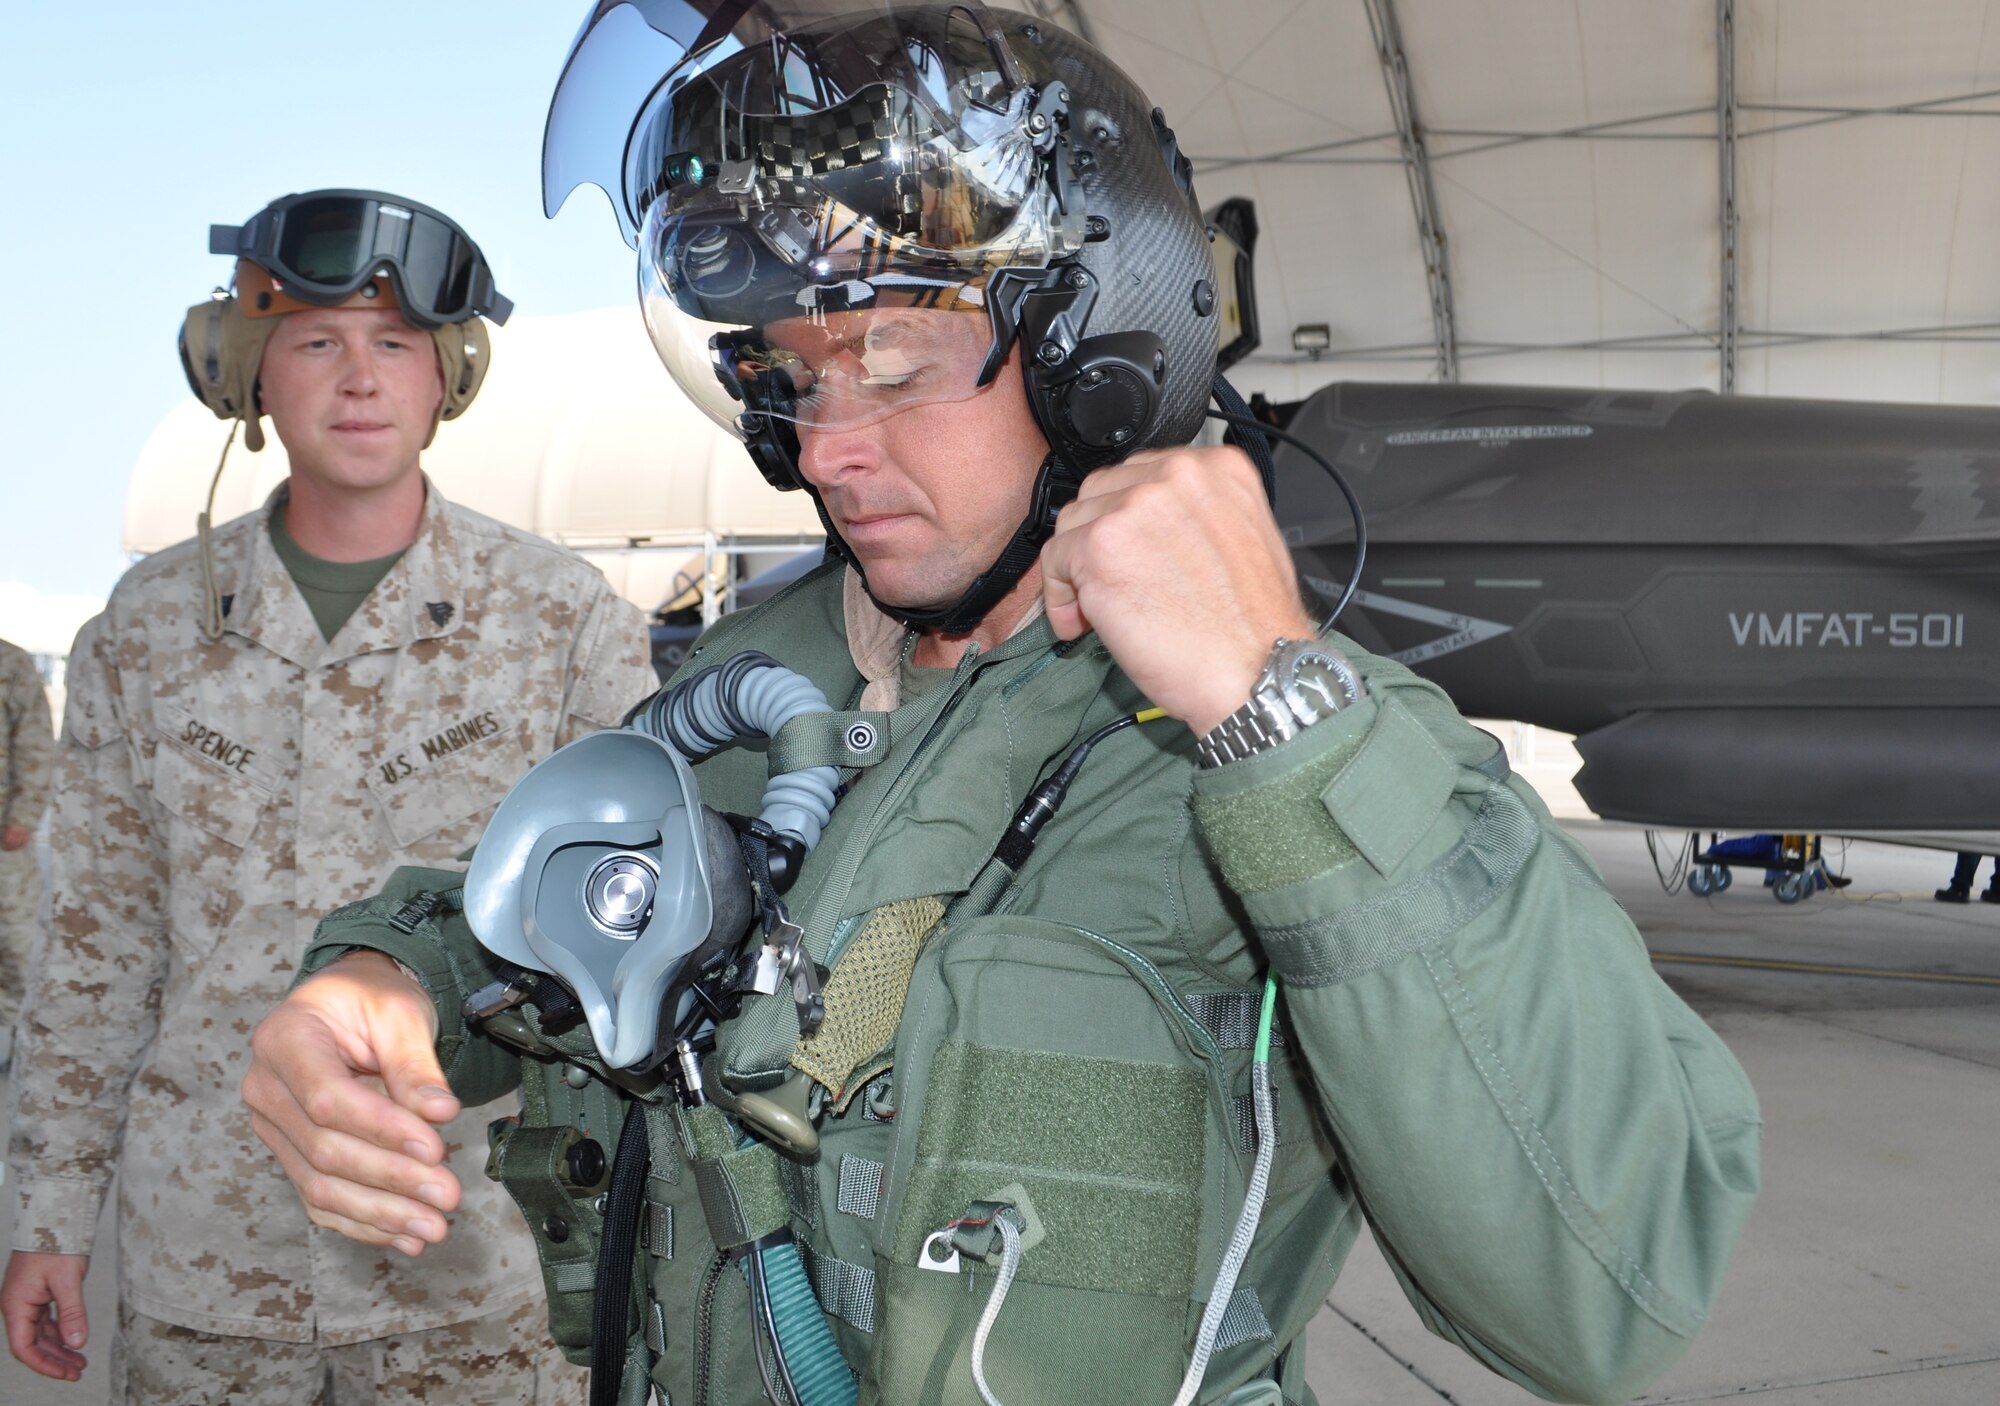 Marine Sgt. Eric Spence, a plane captain with Marine Fighter Attack Training Squadron-501, and Marine Maj. Joseph Bachmann prepare life support equipment for their first F-35B sortie May 22. The goal for Marines was to start local area operations and conventional flights, beginning the process of gradually expanding the envelope to short takeoffs and vertical landings and more complex aerial training.The historic flight at Eglin Air Force Base was airborne during the Marine Corps' 100th year of aviation, two months after 2nd Marine Aircraft Wing officially introduced the service's fifth generation fighter to the world at the 33rd Fighter Wing. (U.S. Air Force photo/Maj. Karen Roganov)
